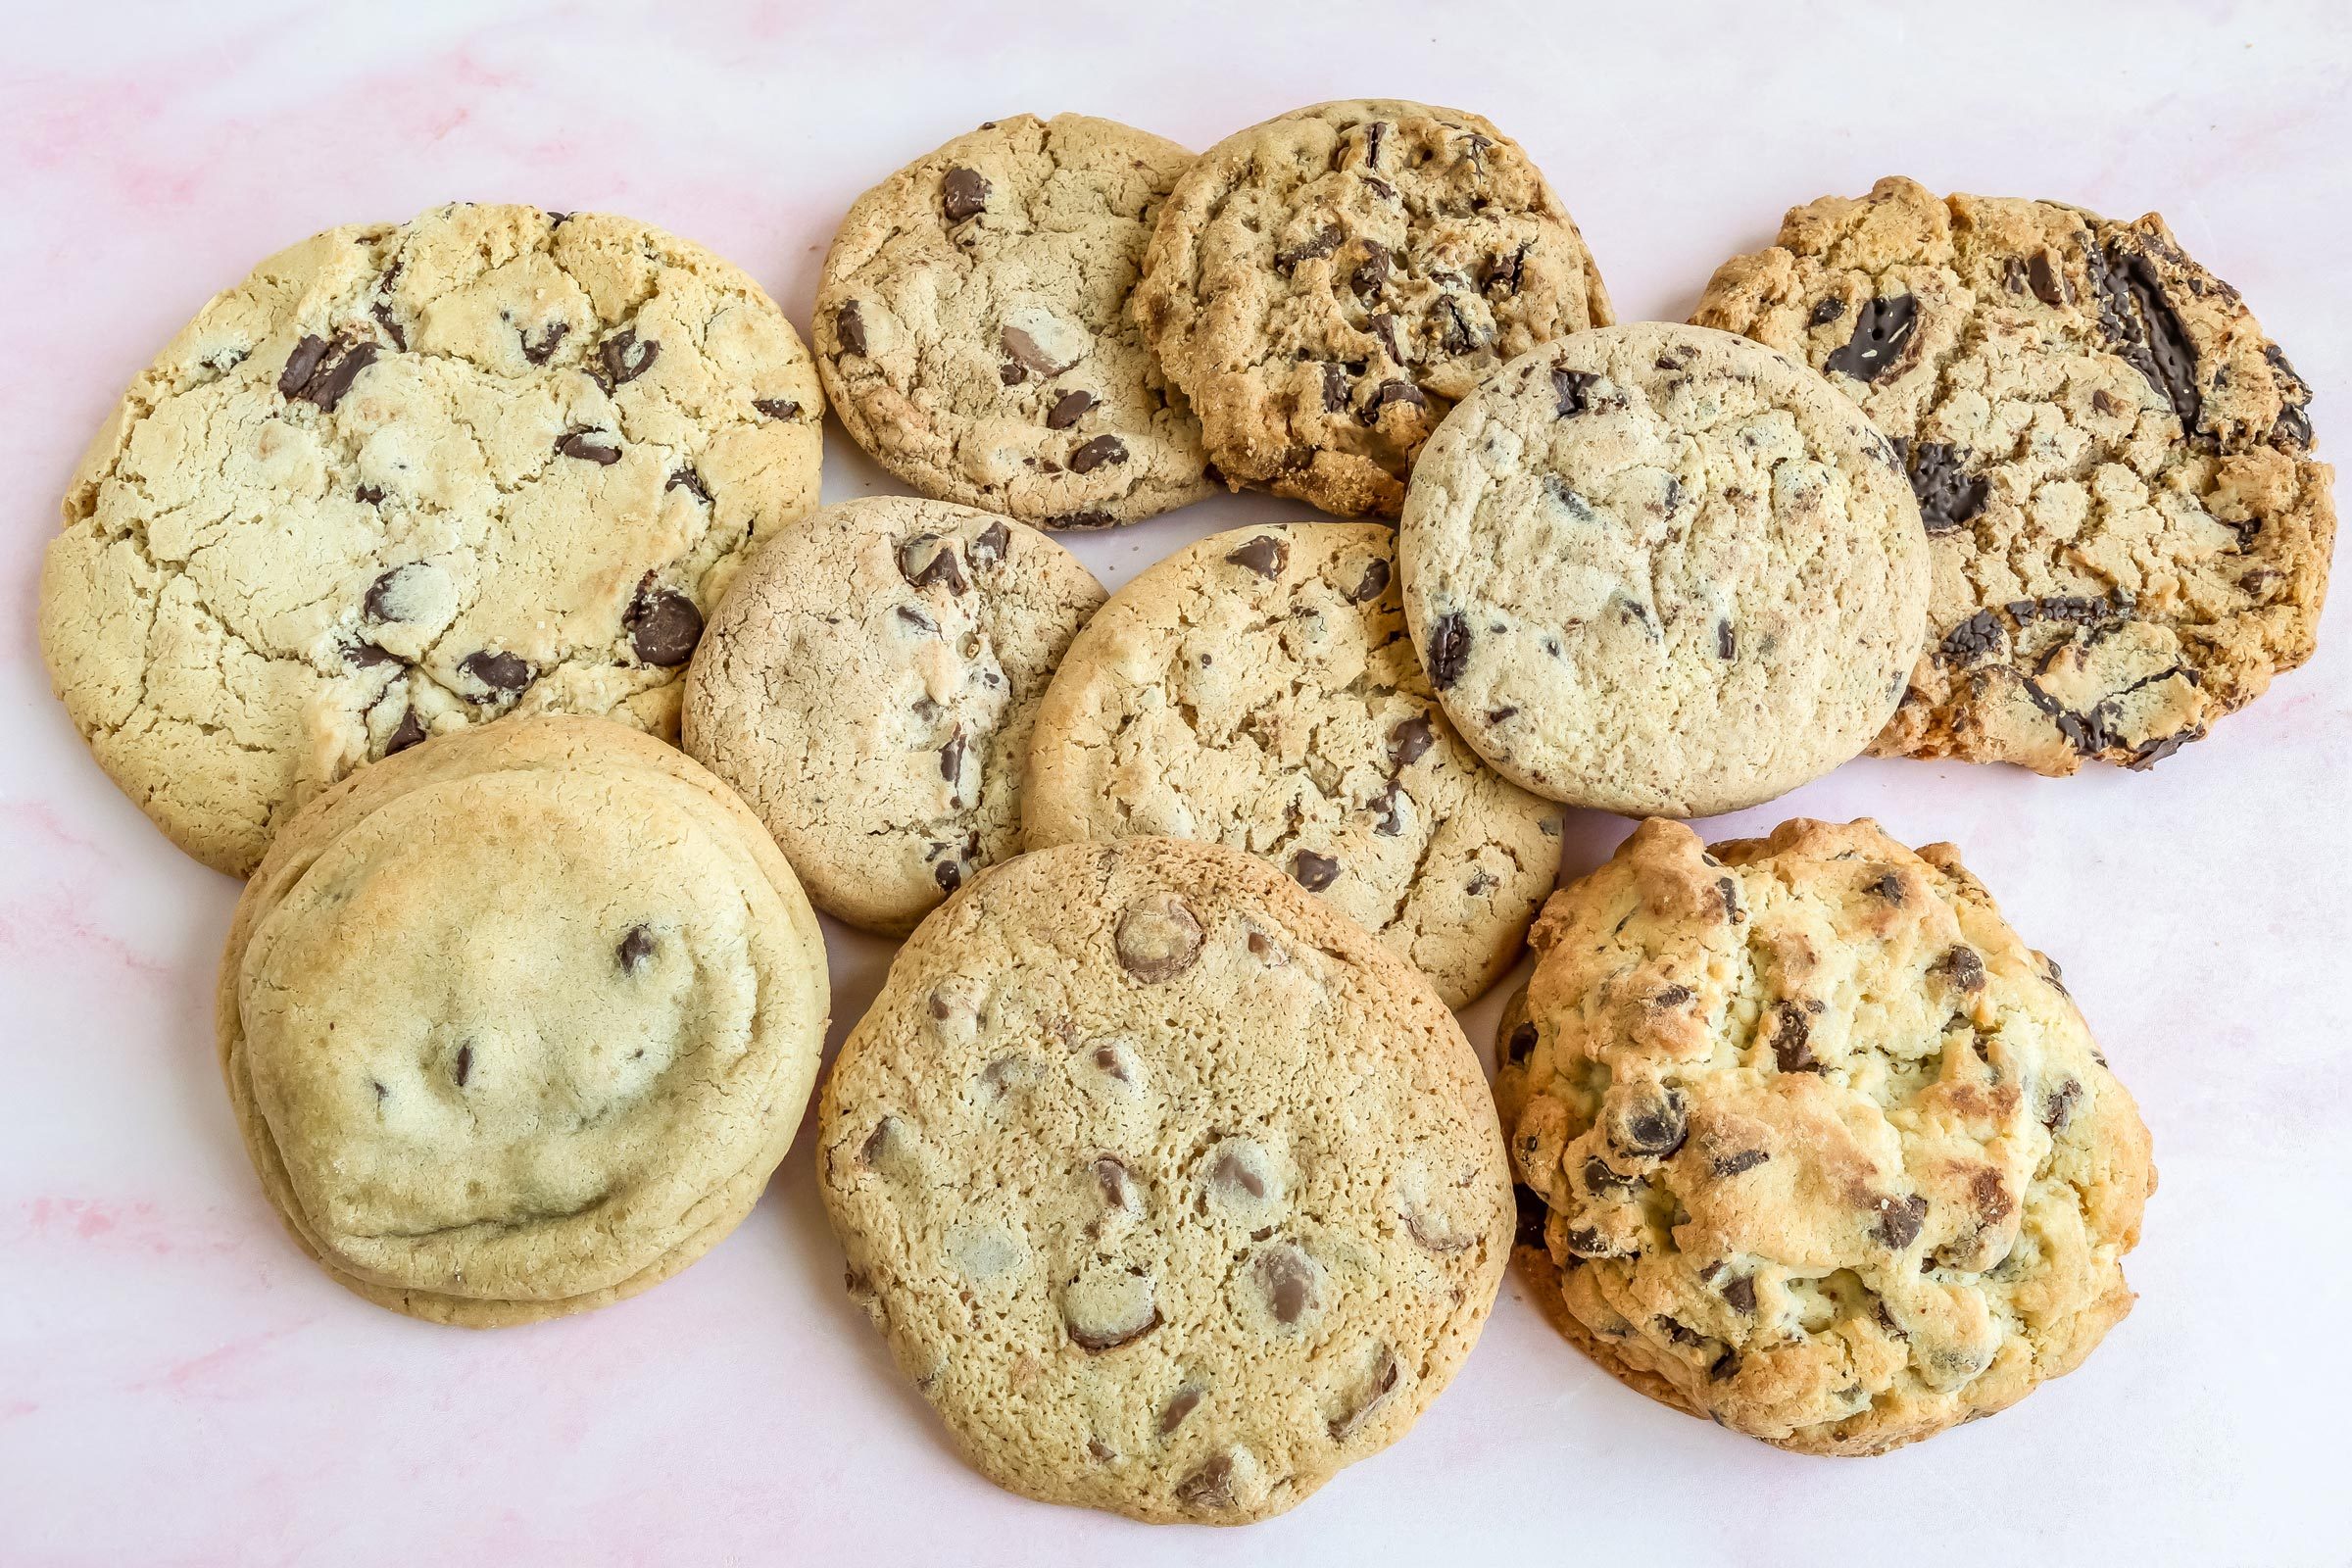 multiple Chocolate Chip Cookies in a pile on a kitchen countertop